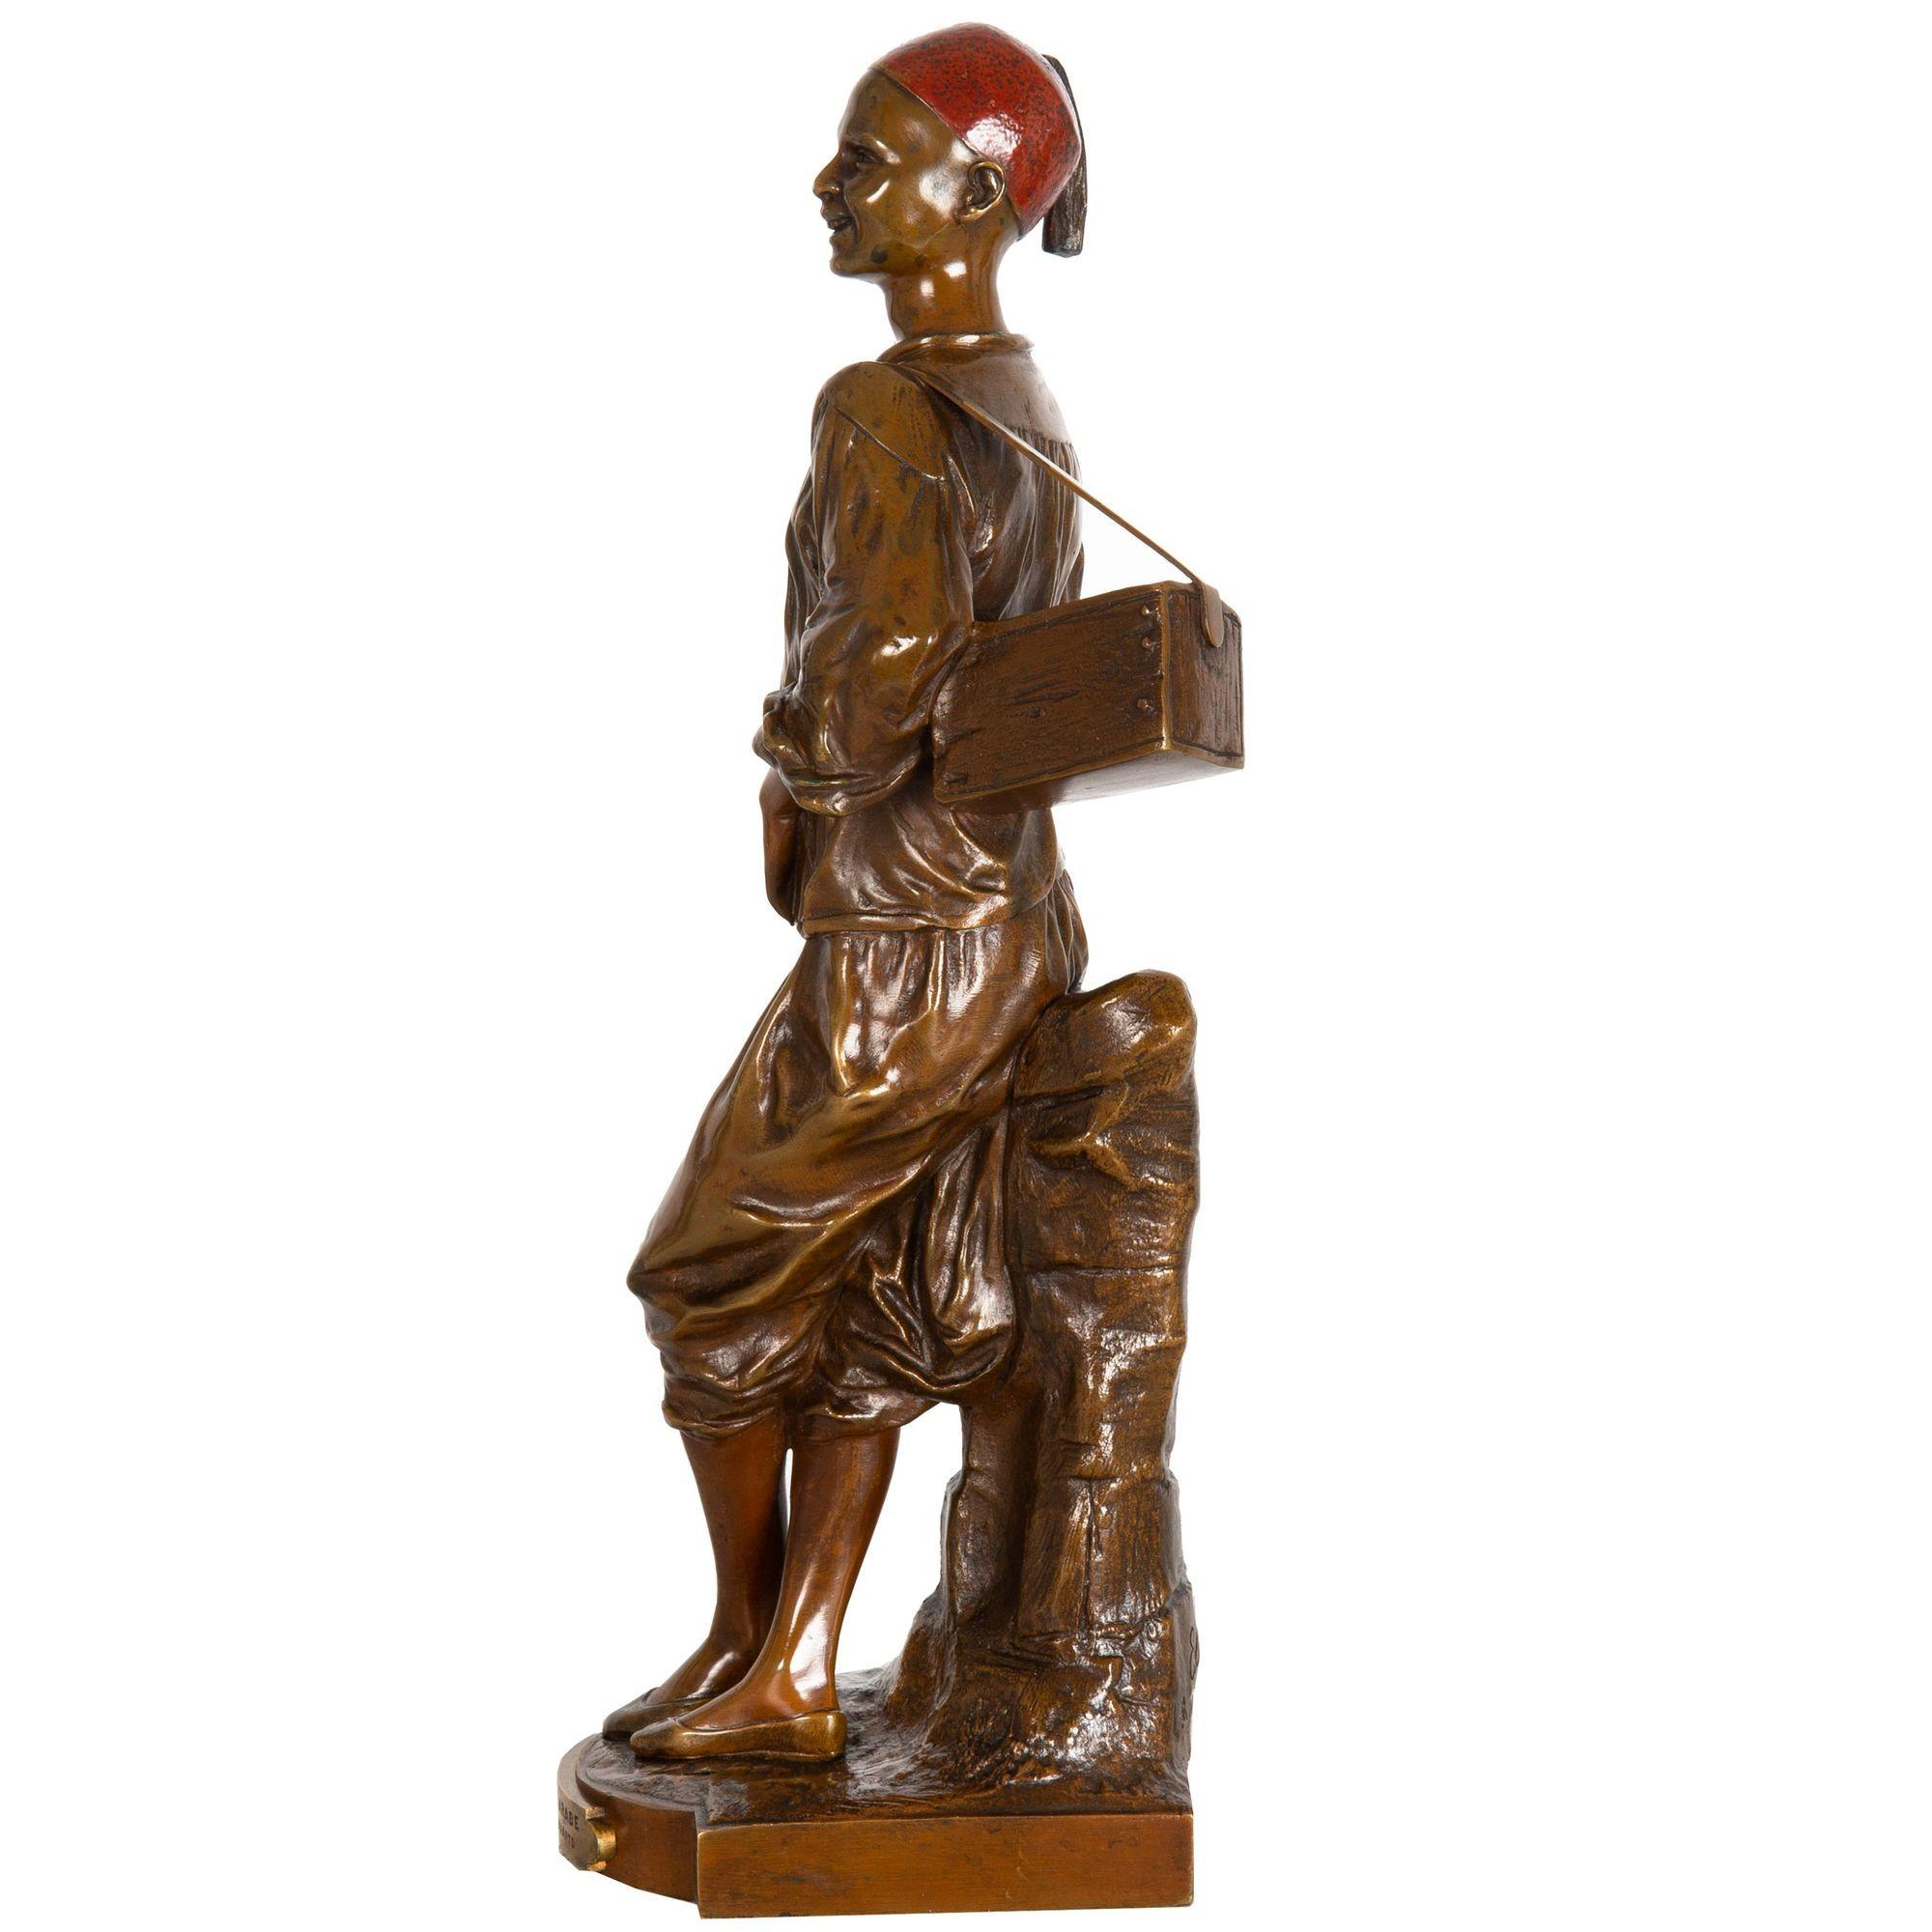 French Orientalist Bronze Sculpture “Arab Shoeshine” after Edouard Drouot In Good Condition For Sale In Shippensburg, PA